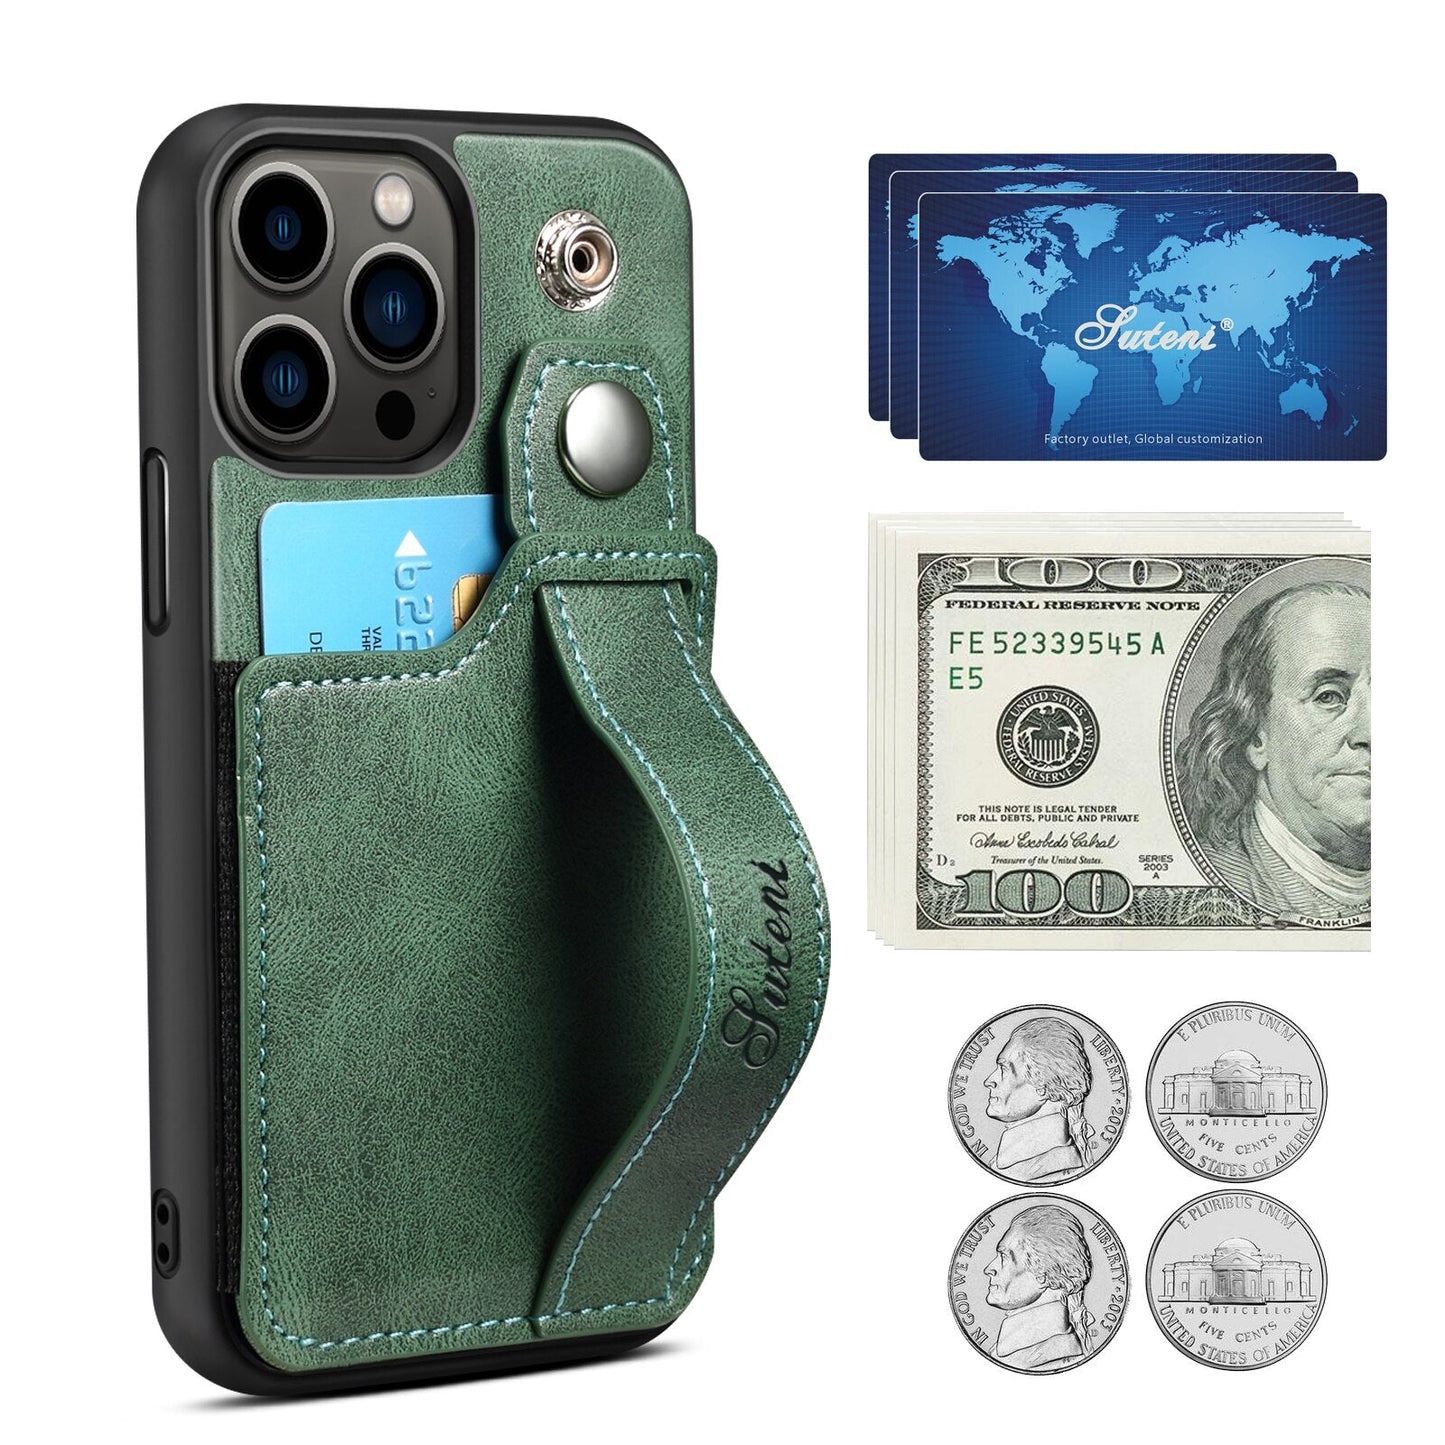 IPhone 14 Pro Max Case PU Leather Wallet Flip Cover Stand Feature With Wrist Strap And Credit Cards Pocket